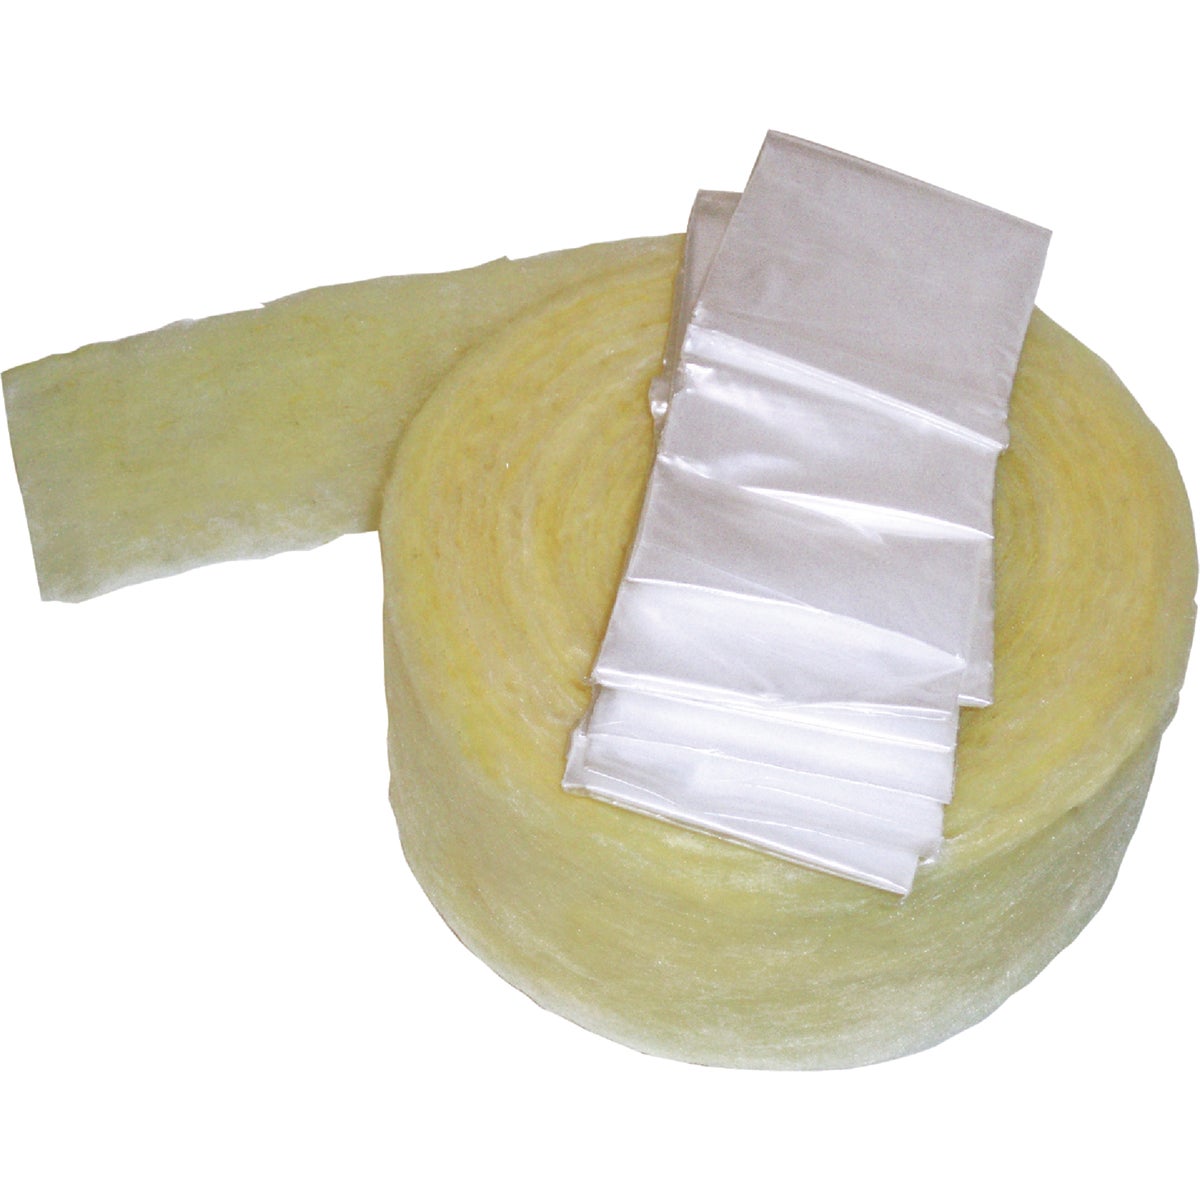 Item 514875, Frost King's fiberglass pipe wrap is a simple, effective way to insulate 